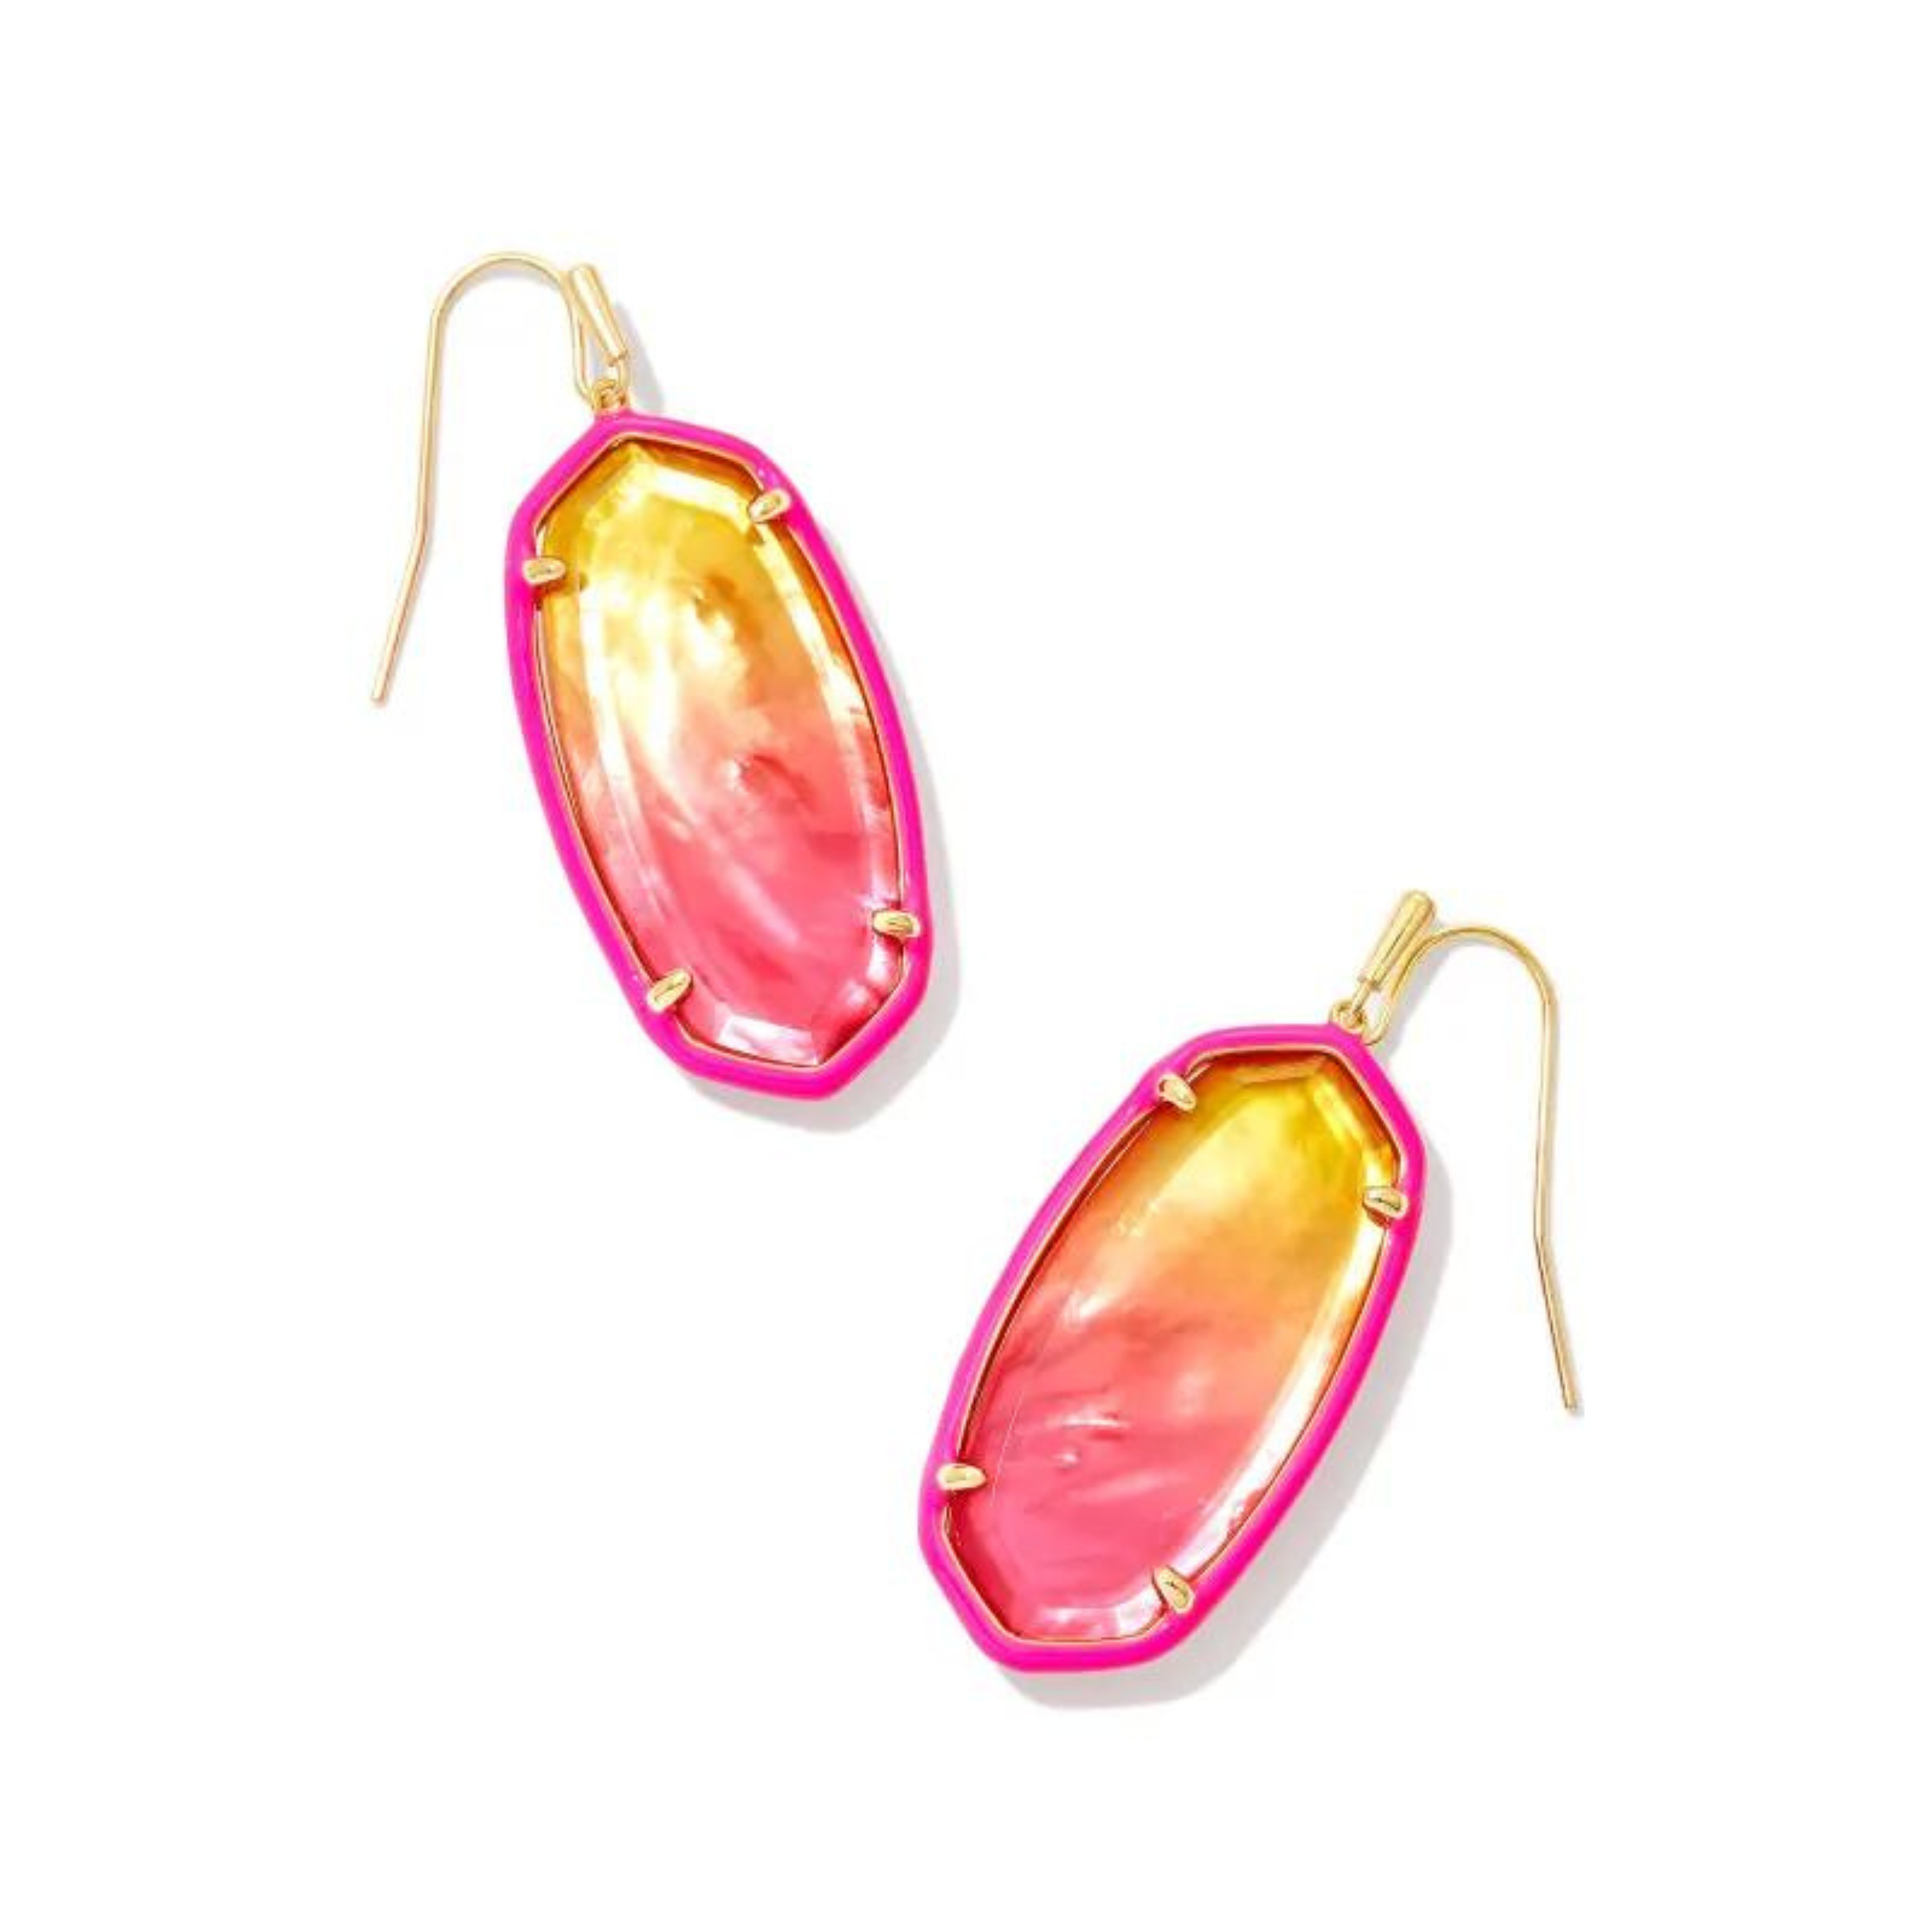 Pictured on a white background is a pair of oval shaped gold and pink earrings. These earrings include a gold fish hook. 